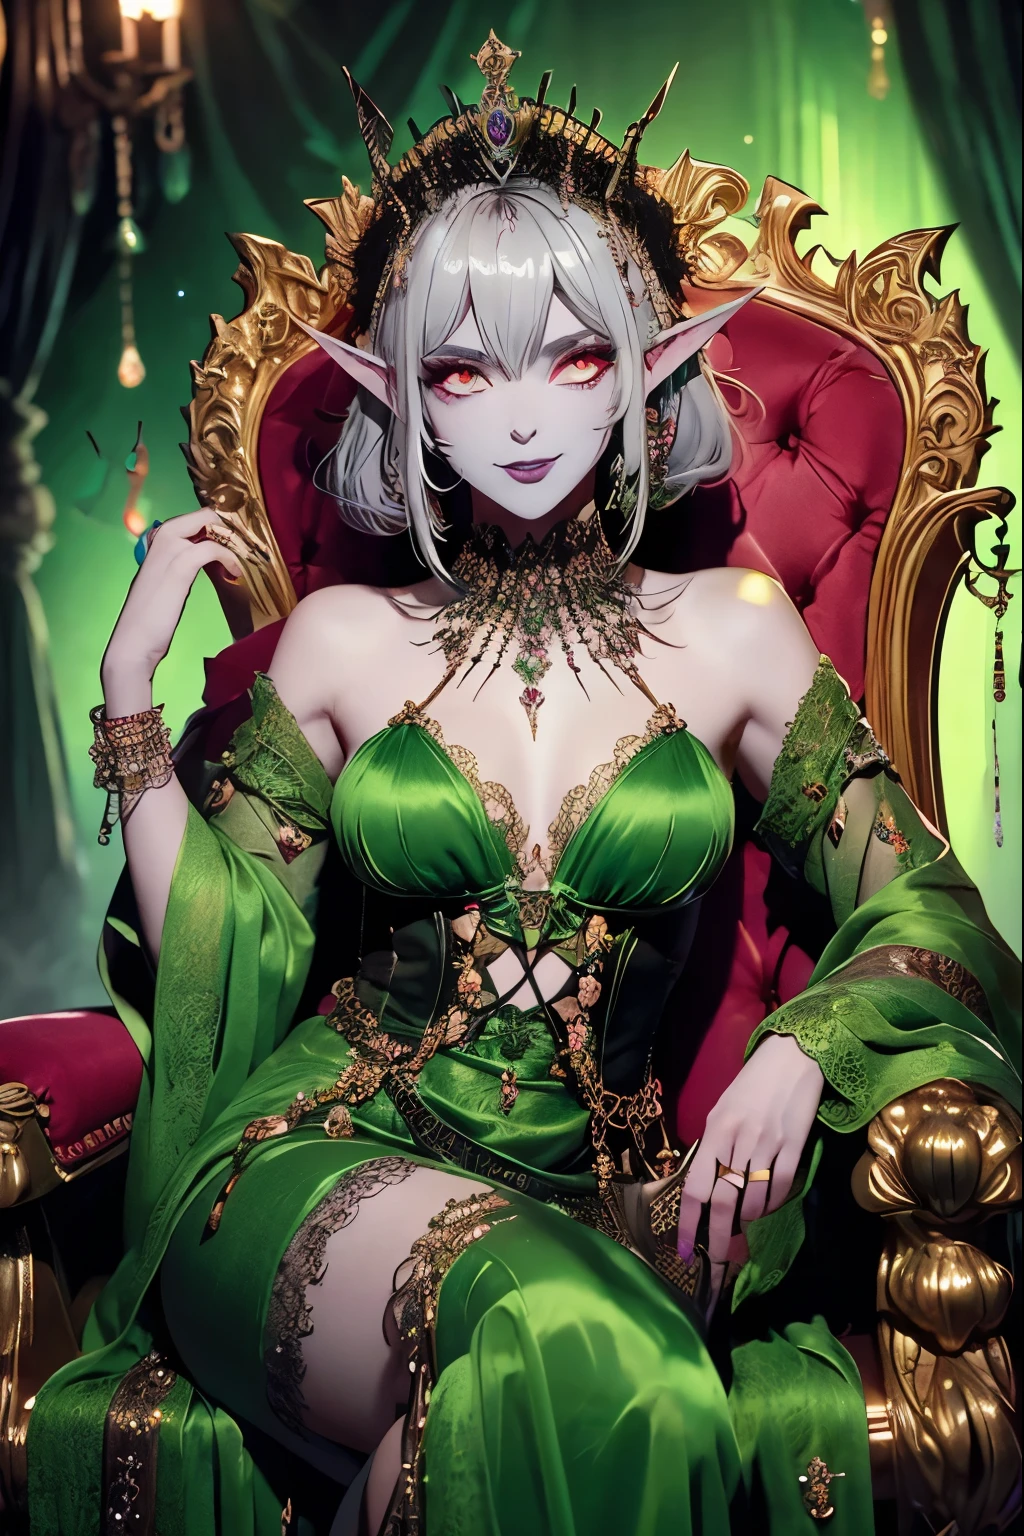 (Ultra-detailed face, Brutal eyes), (Fantasy Illustration with Gothic & Ukiyo-e & Comic Art), (Full Body, A middle-aged ice elf woman with silver hair, blunt bangs, very very long disheveled hair, and silver skin, Eyes burning yerrow), (The queen wears a jade tiara, a large jeweled necklace and earrings, a long lacy deep green silk dress, and jeweled green sandals), (The green demon queen lies on a huge, tall throne, hands on her cheeks and a brutal smile on her face), BREAK (An opulent, tall, gigantic gothic throne of glittering splendor, adorned with gems and precious metals. It looks dark:1.2), (In the background, long curtains and many candelabras line either side of the queen's throne in the royal palace)